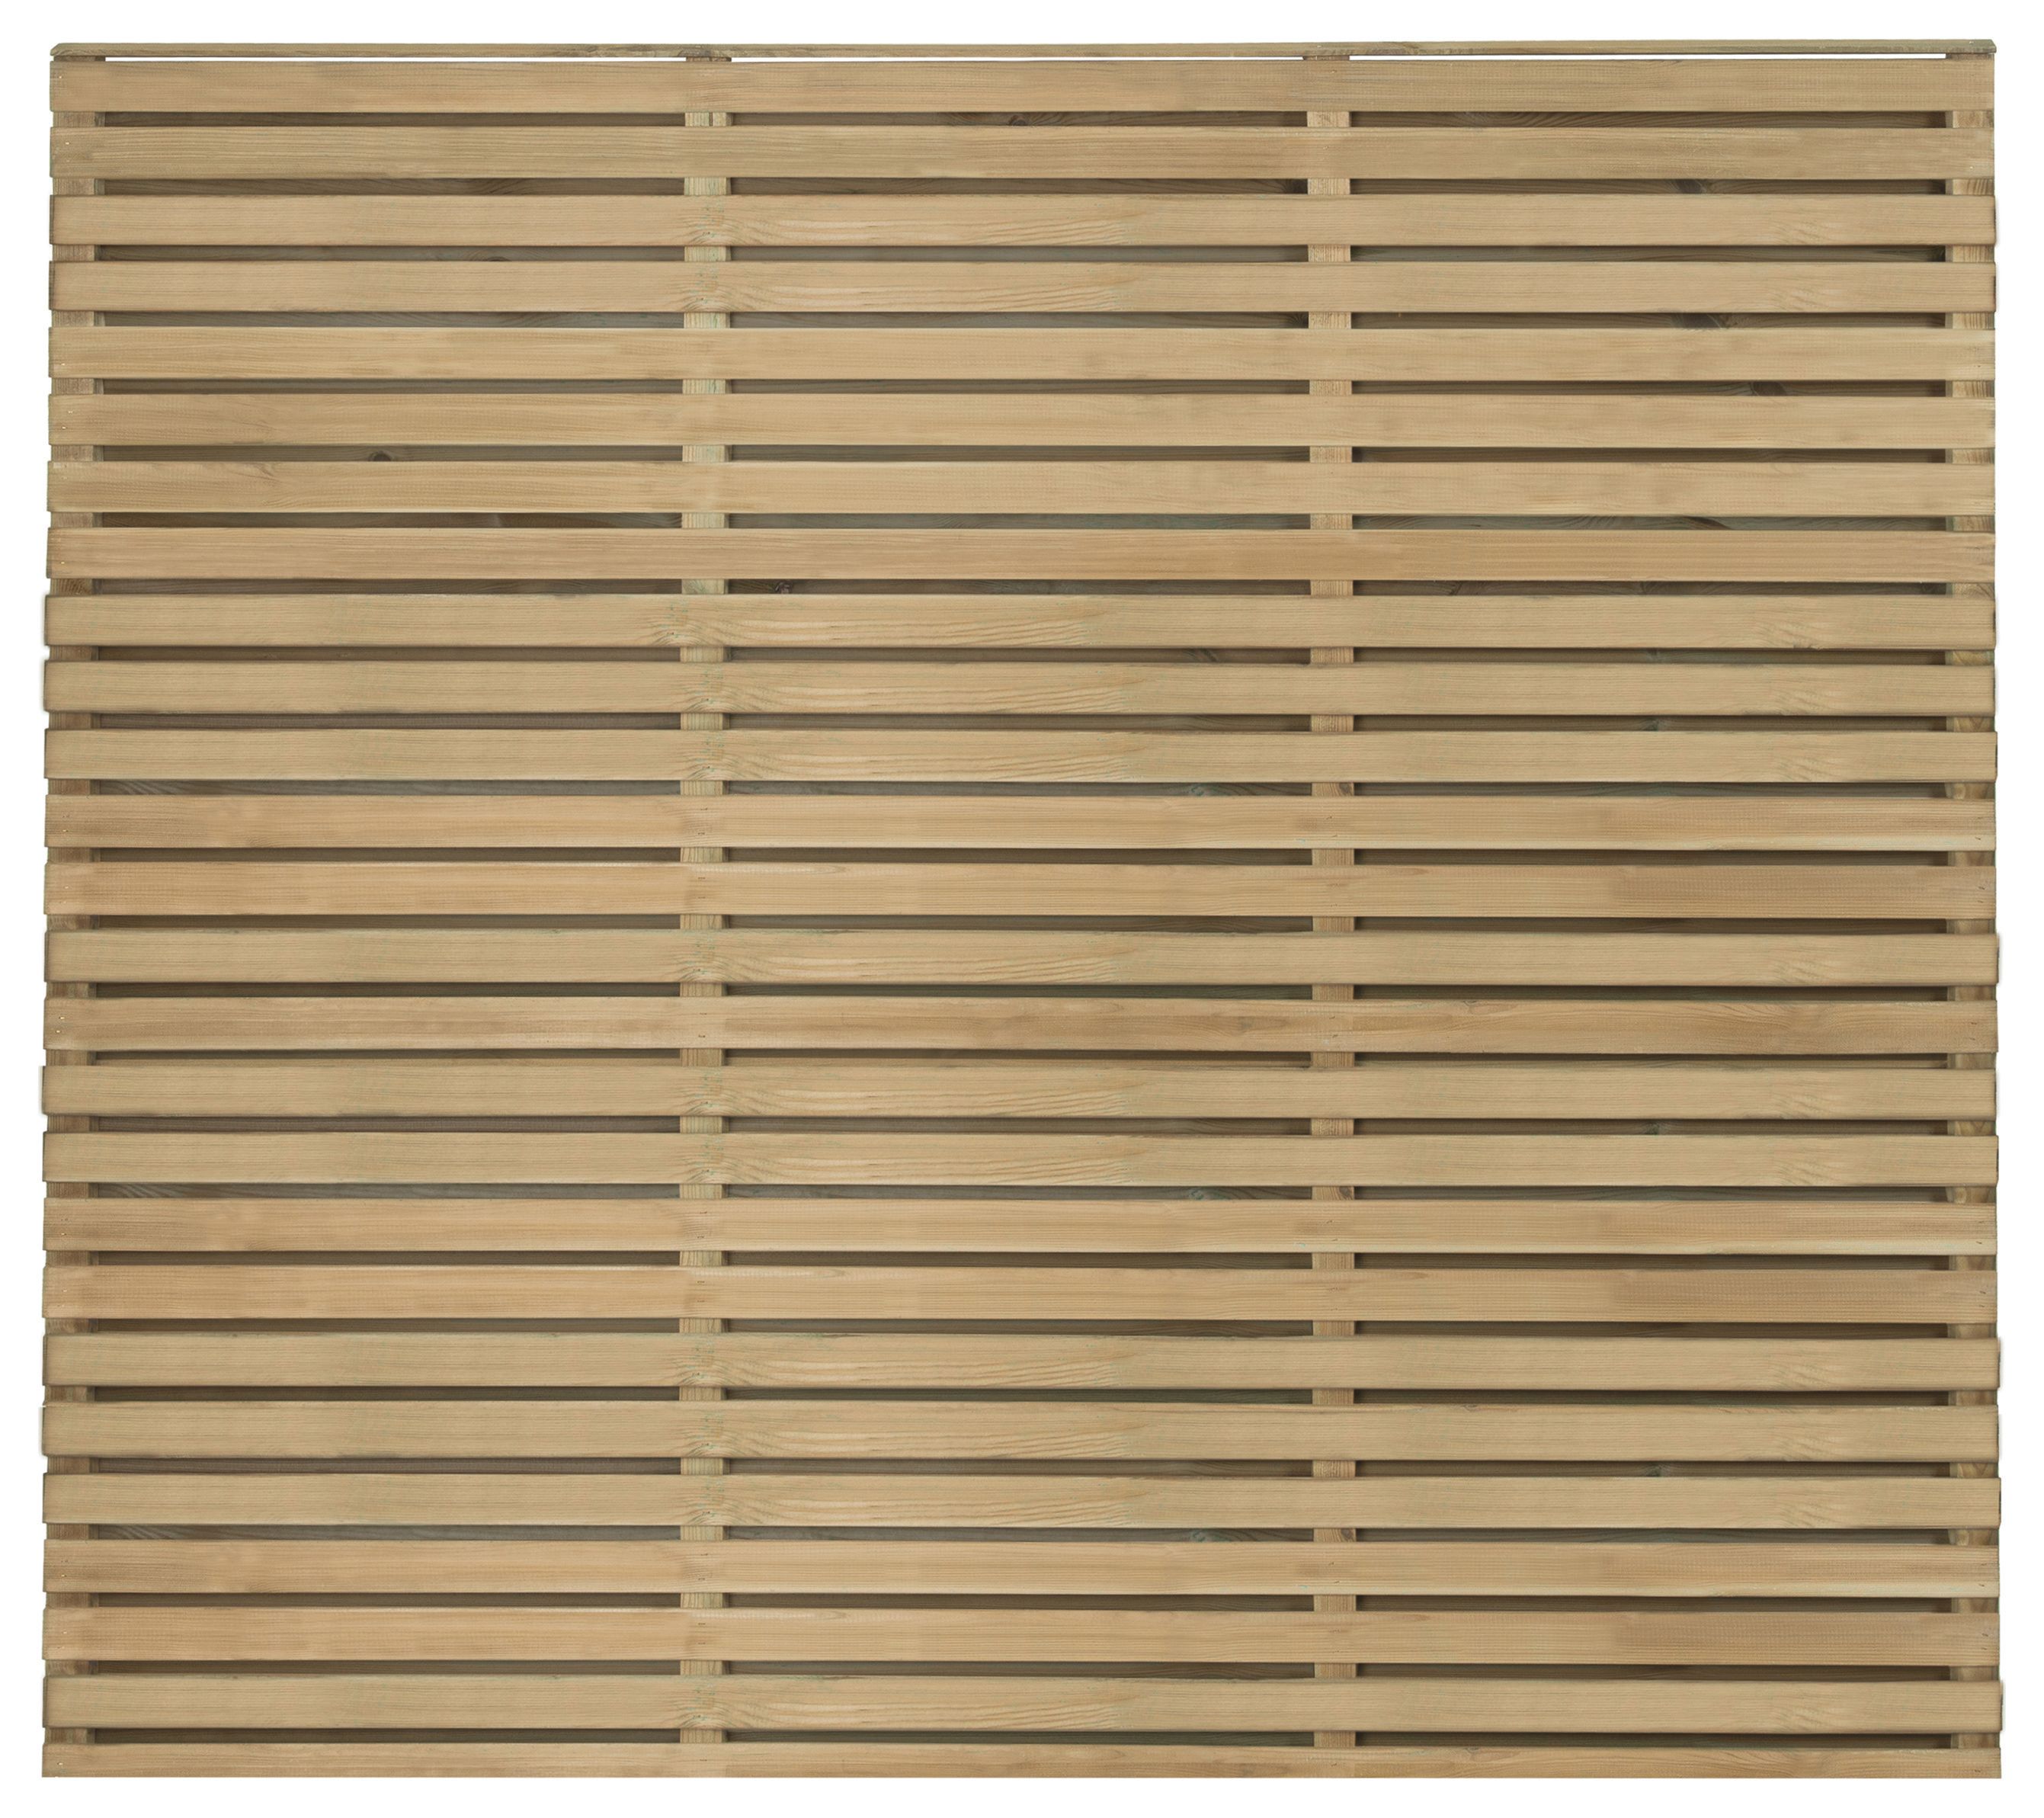 Image of Forest Garden Double Slatted Fence Panel - 1800 x 1500mm - 6 x 5ft - Pack of 3